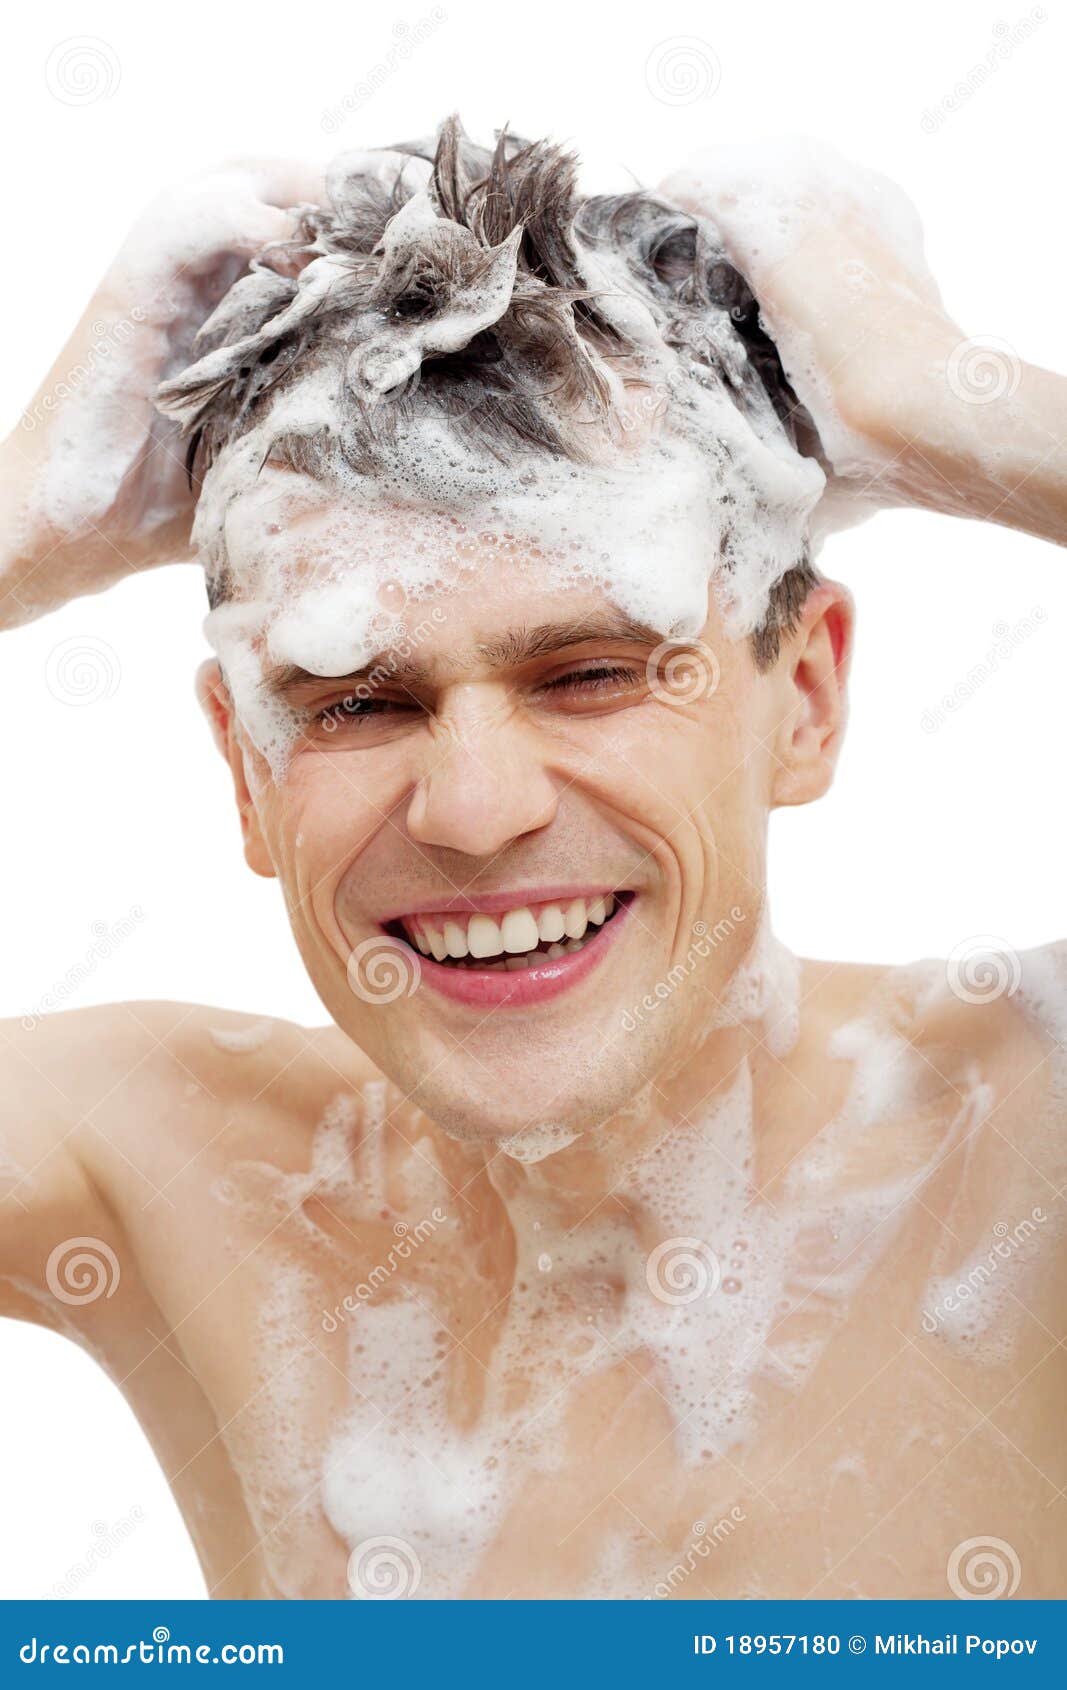 naked man with shampoo over hair